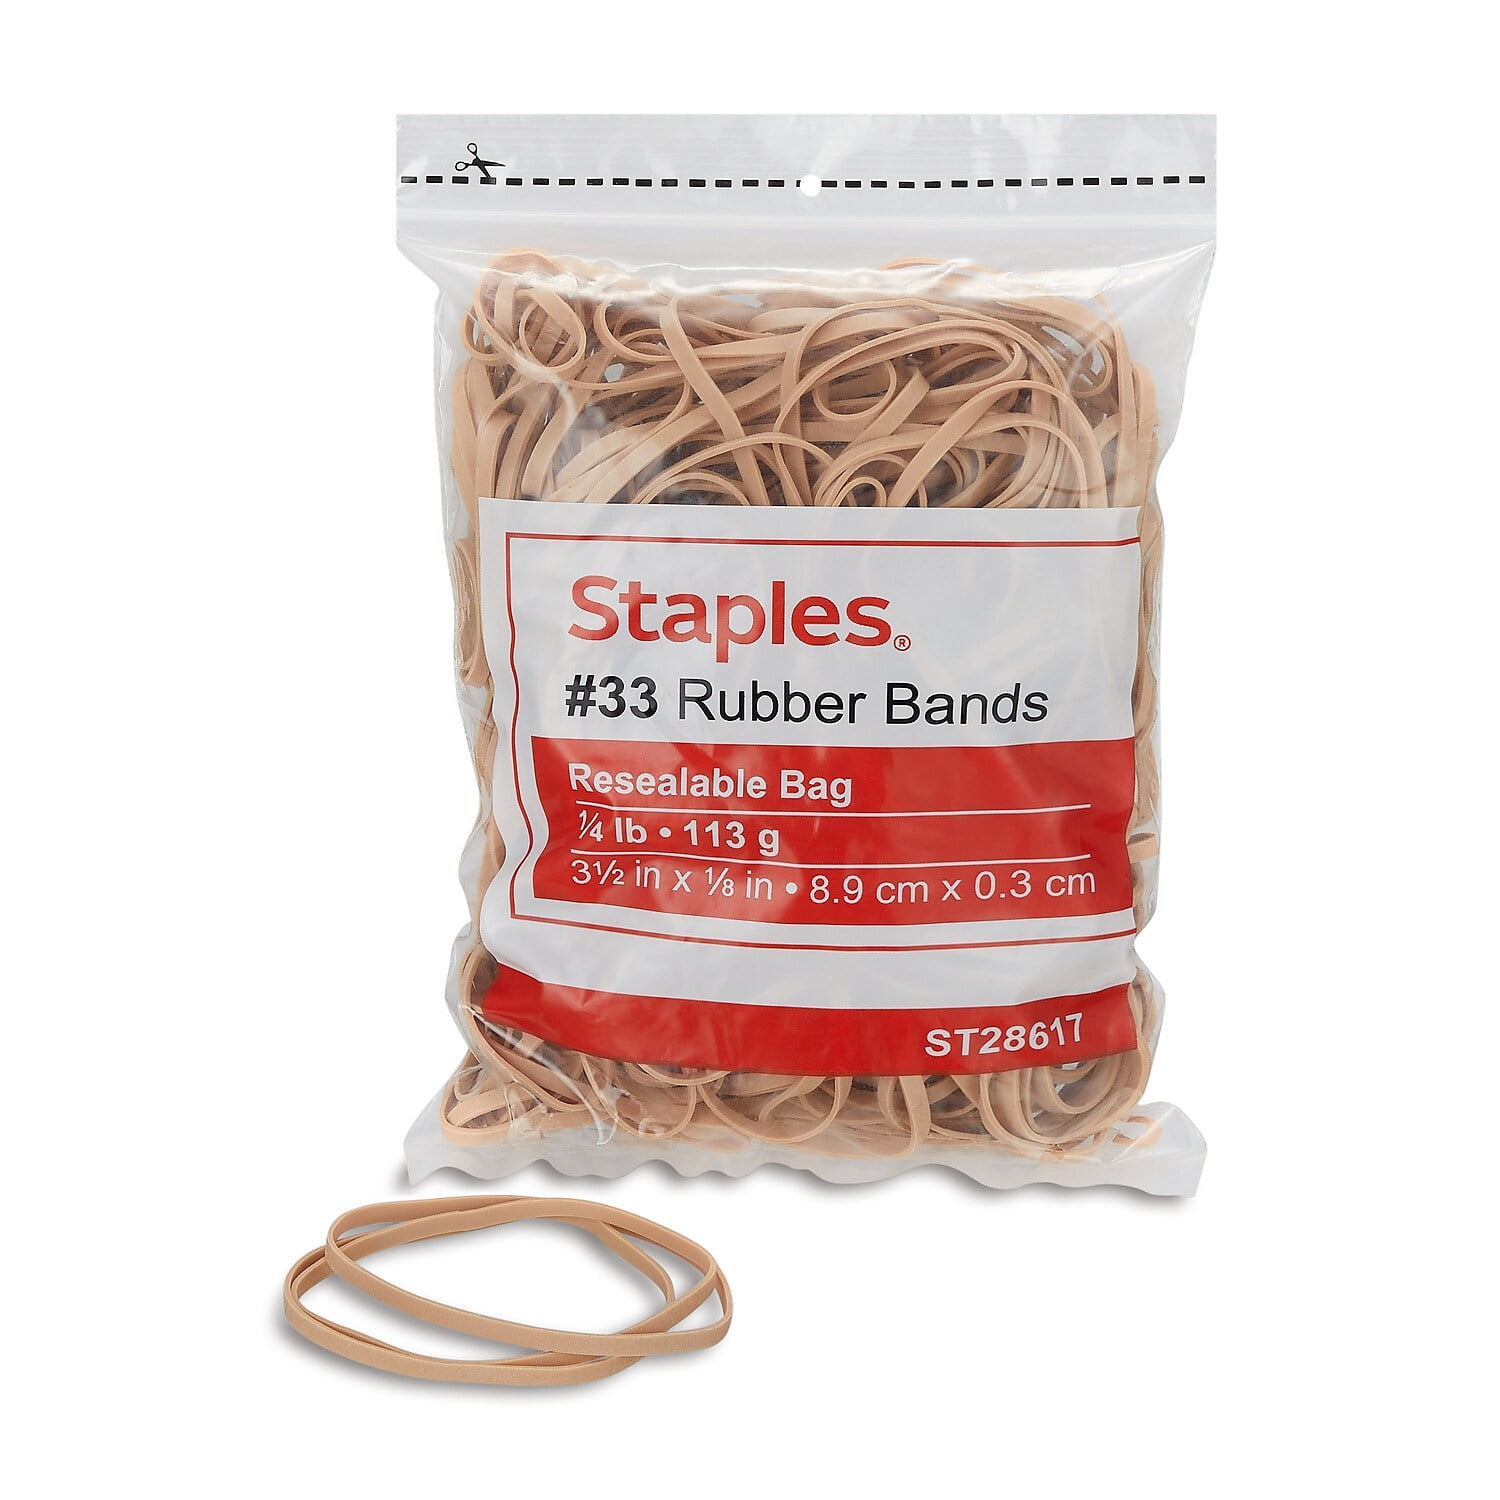 Size 33 Rubber Band Dimensions  Buy Extra Large Rubber Bands - 30